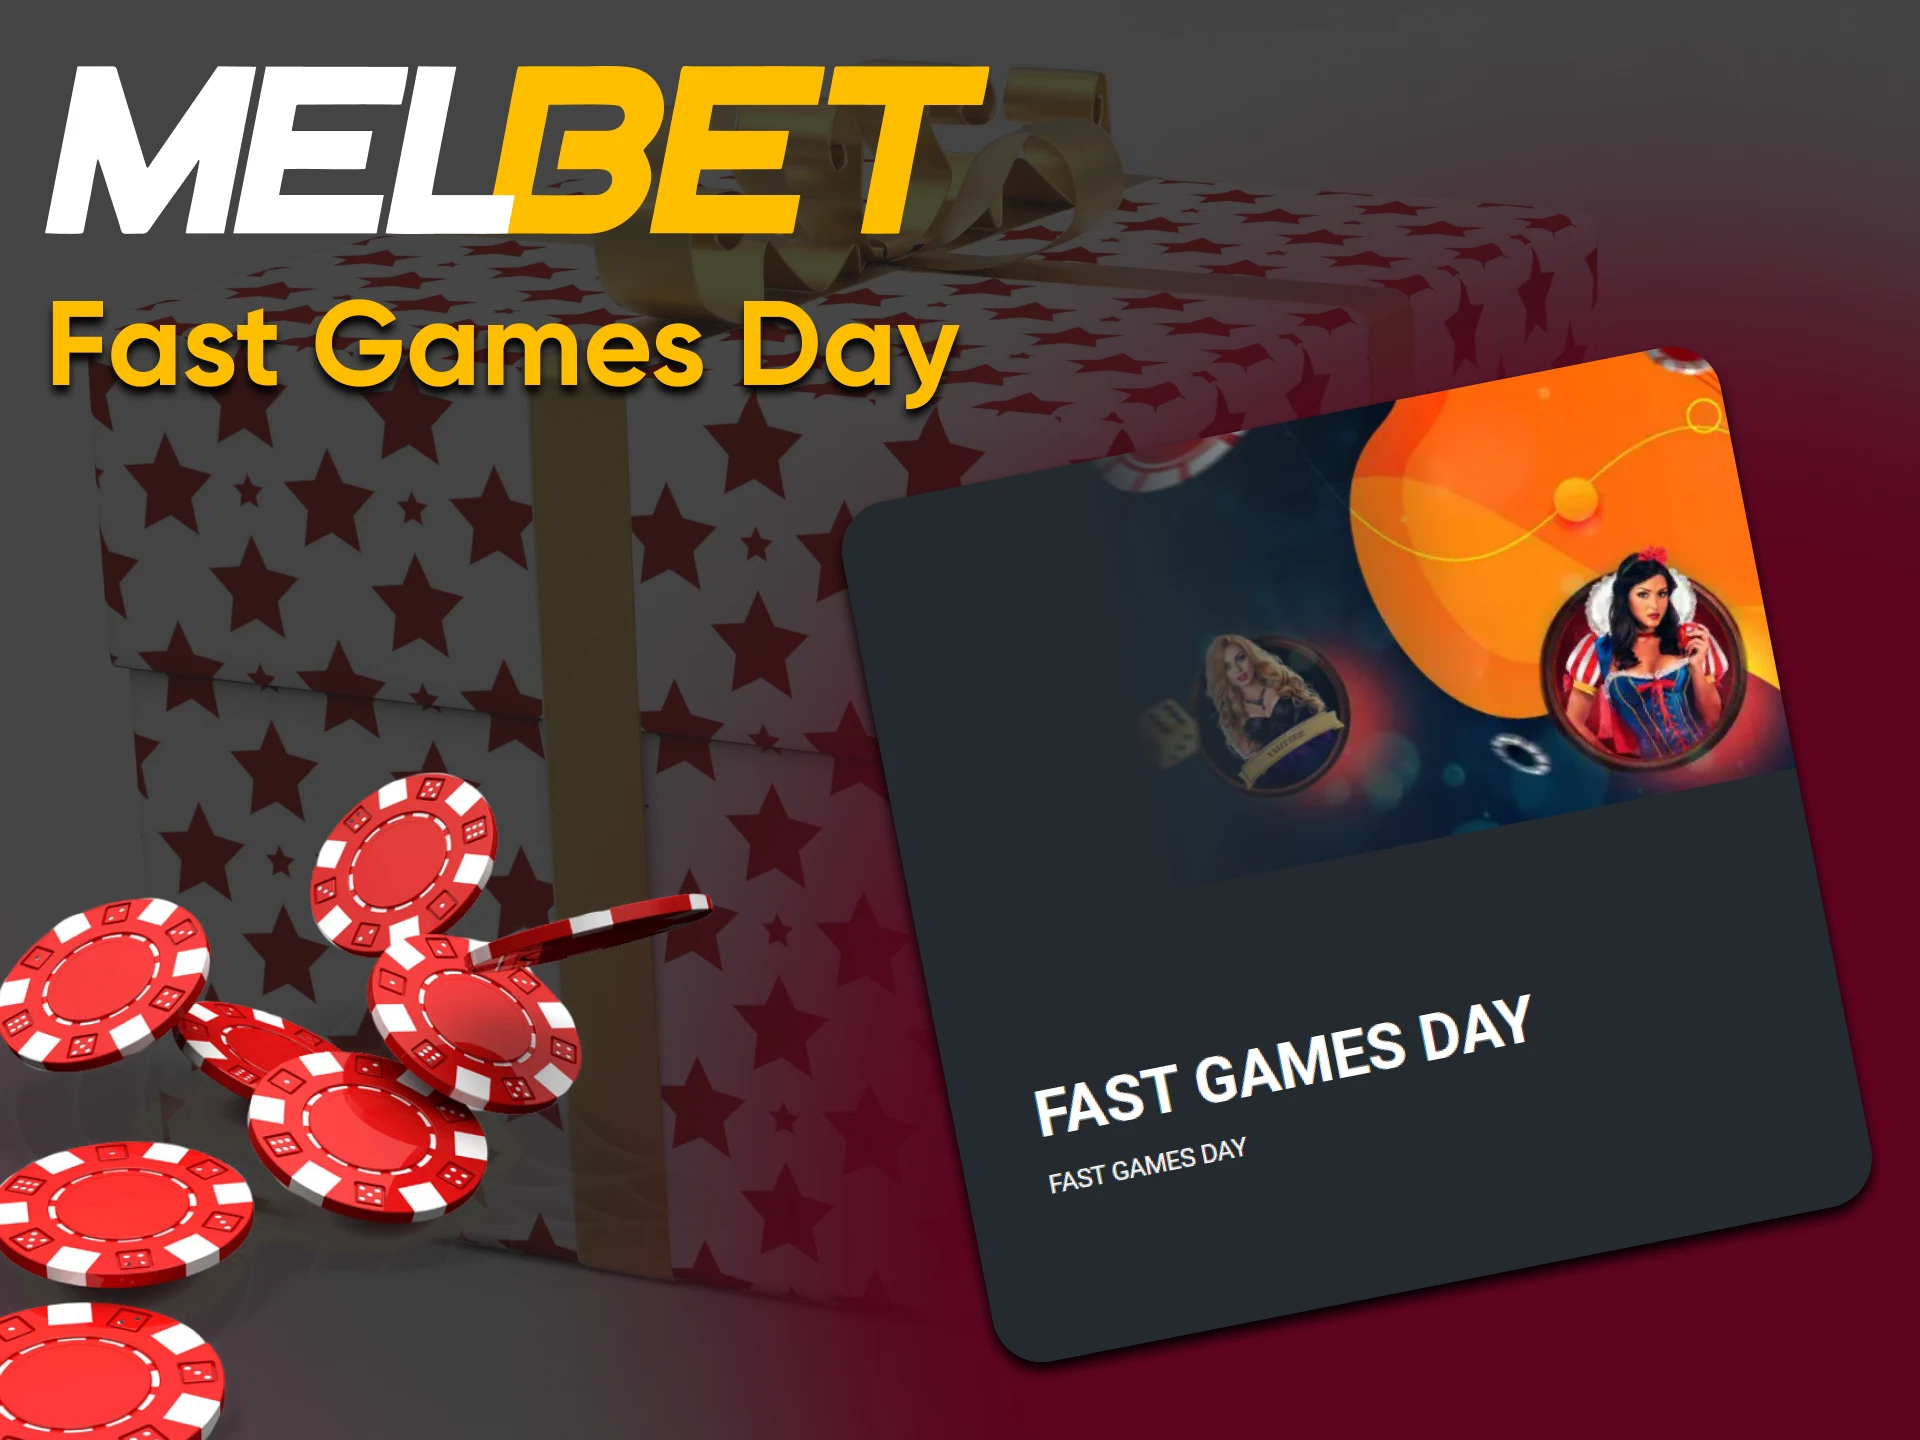 There is an additional Melbet casino bonus.